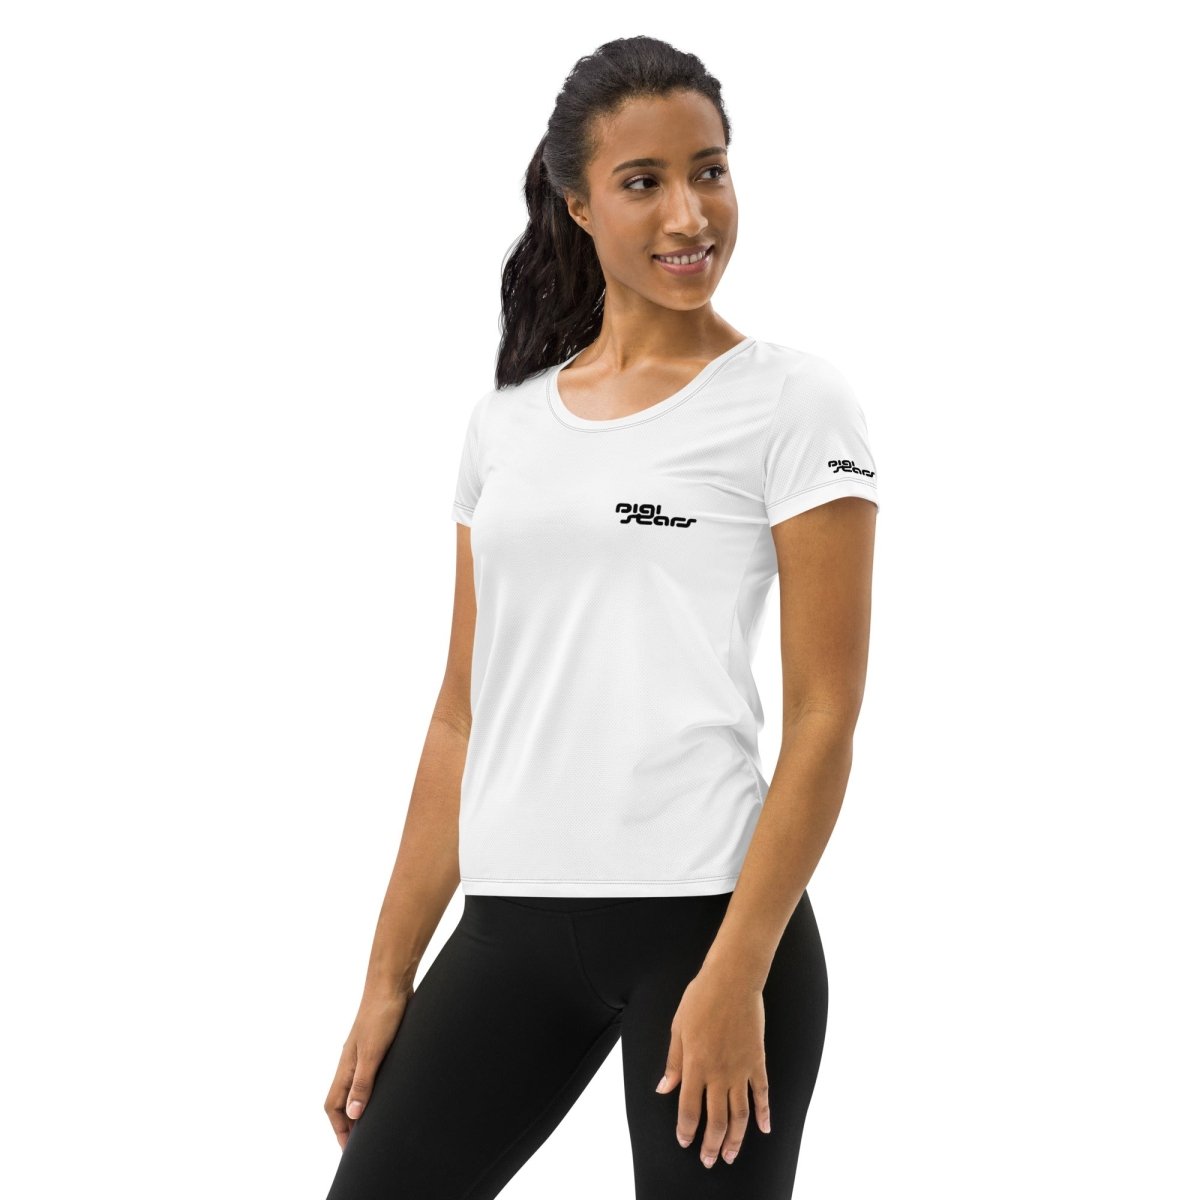 All-Over Print Women's Athletic T-shirt - digistars